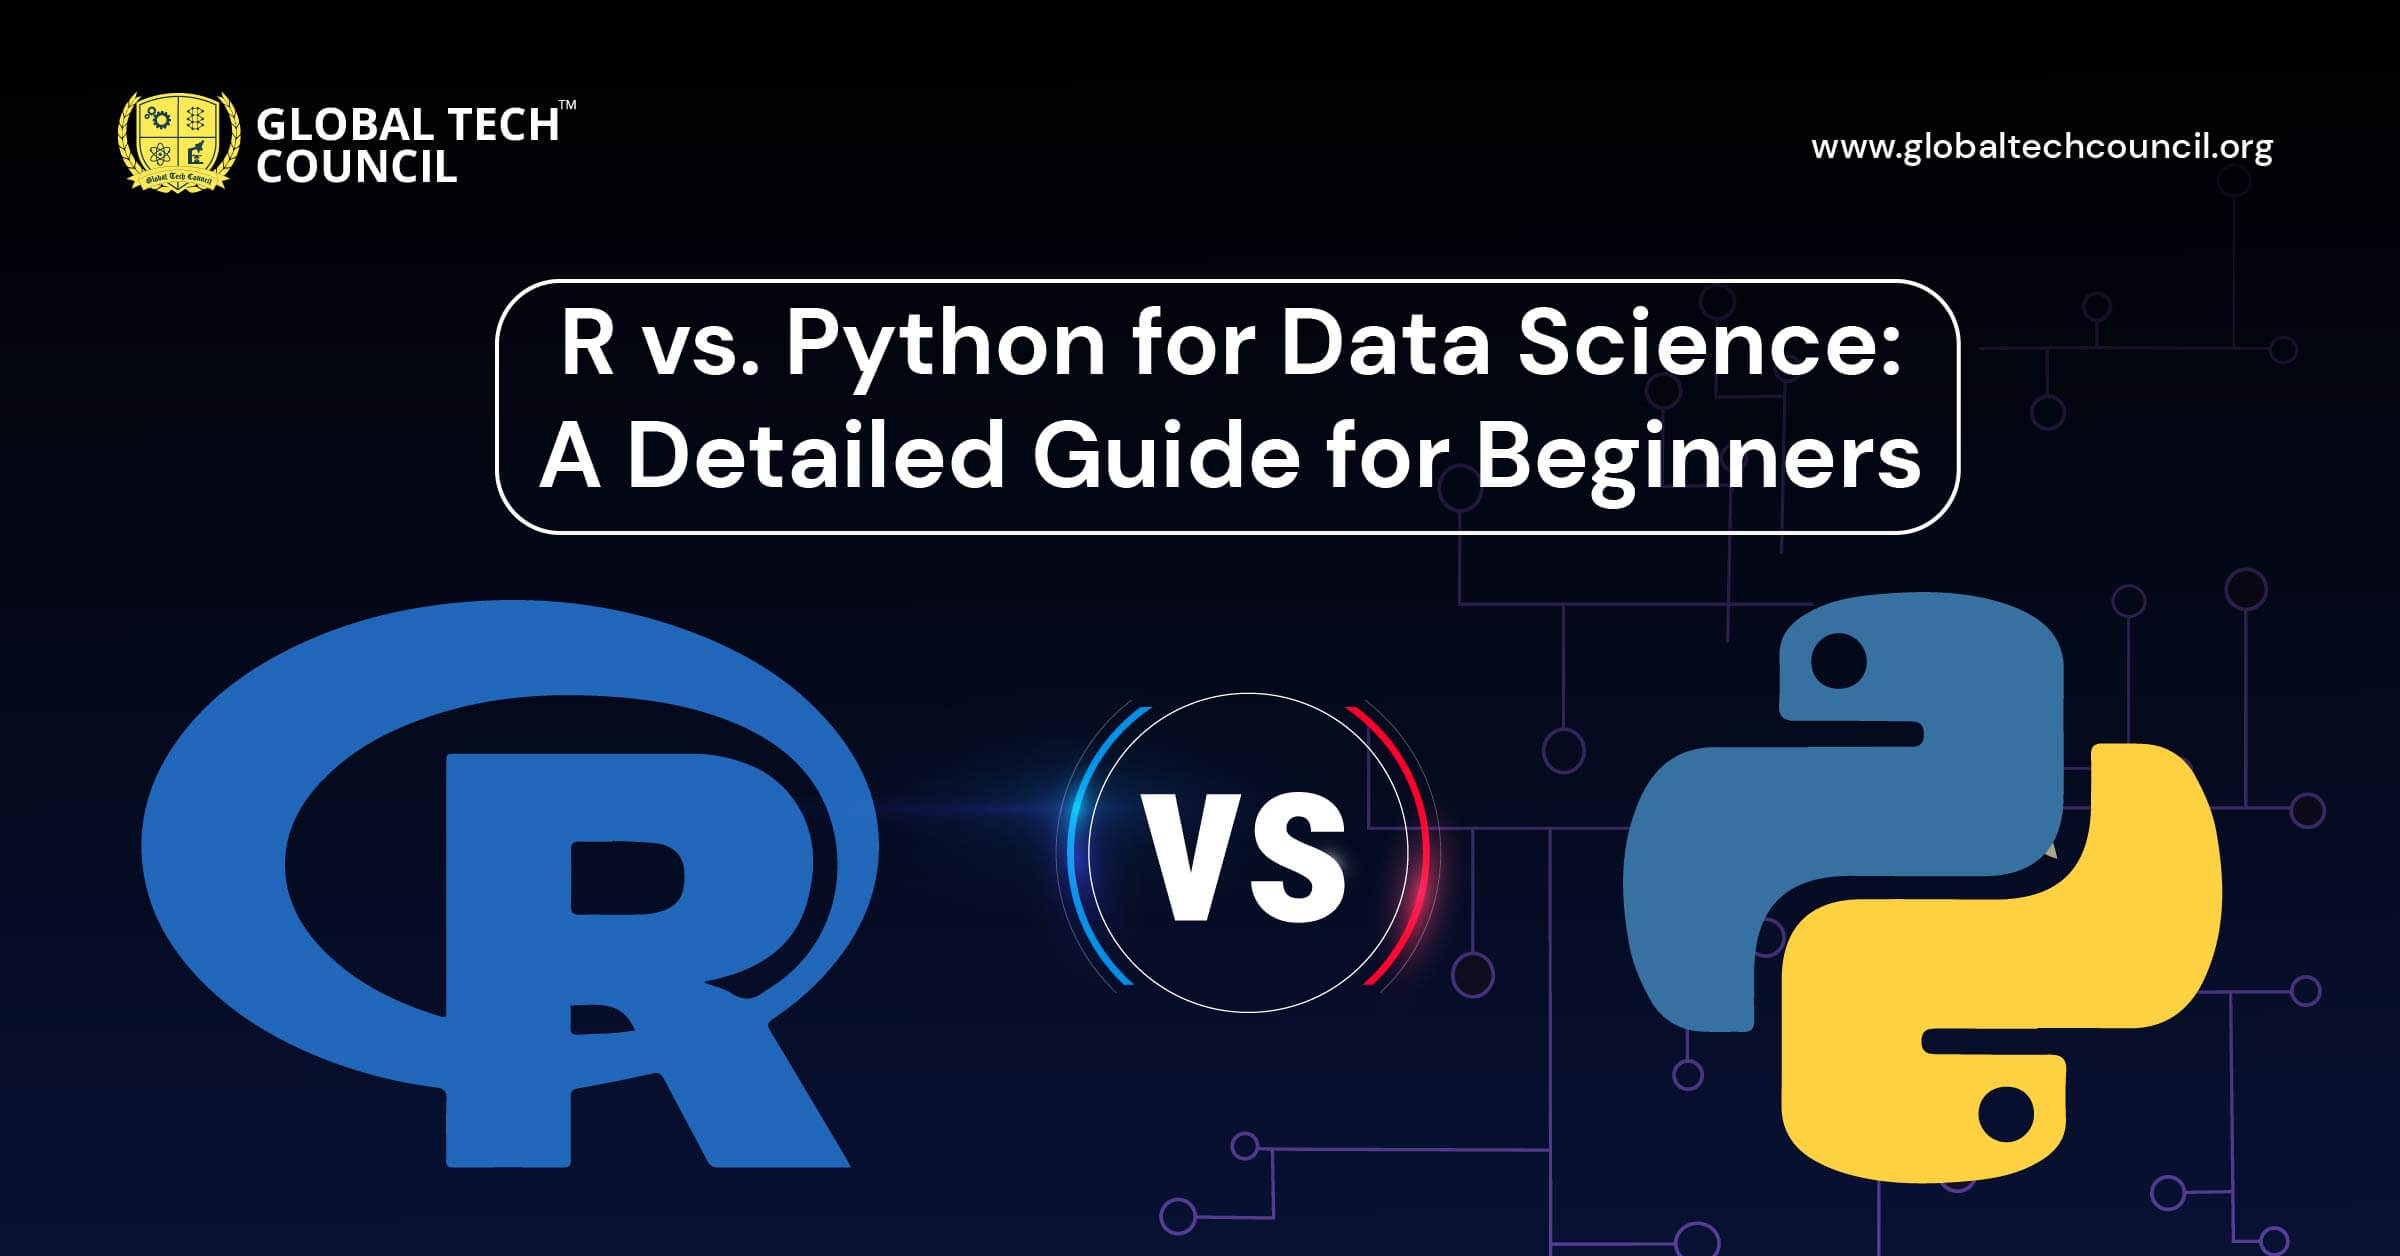 R vs. Python for Data Science A Detailed Guide for Beginners